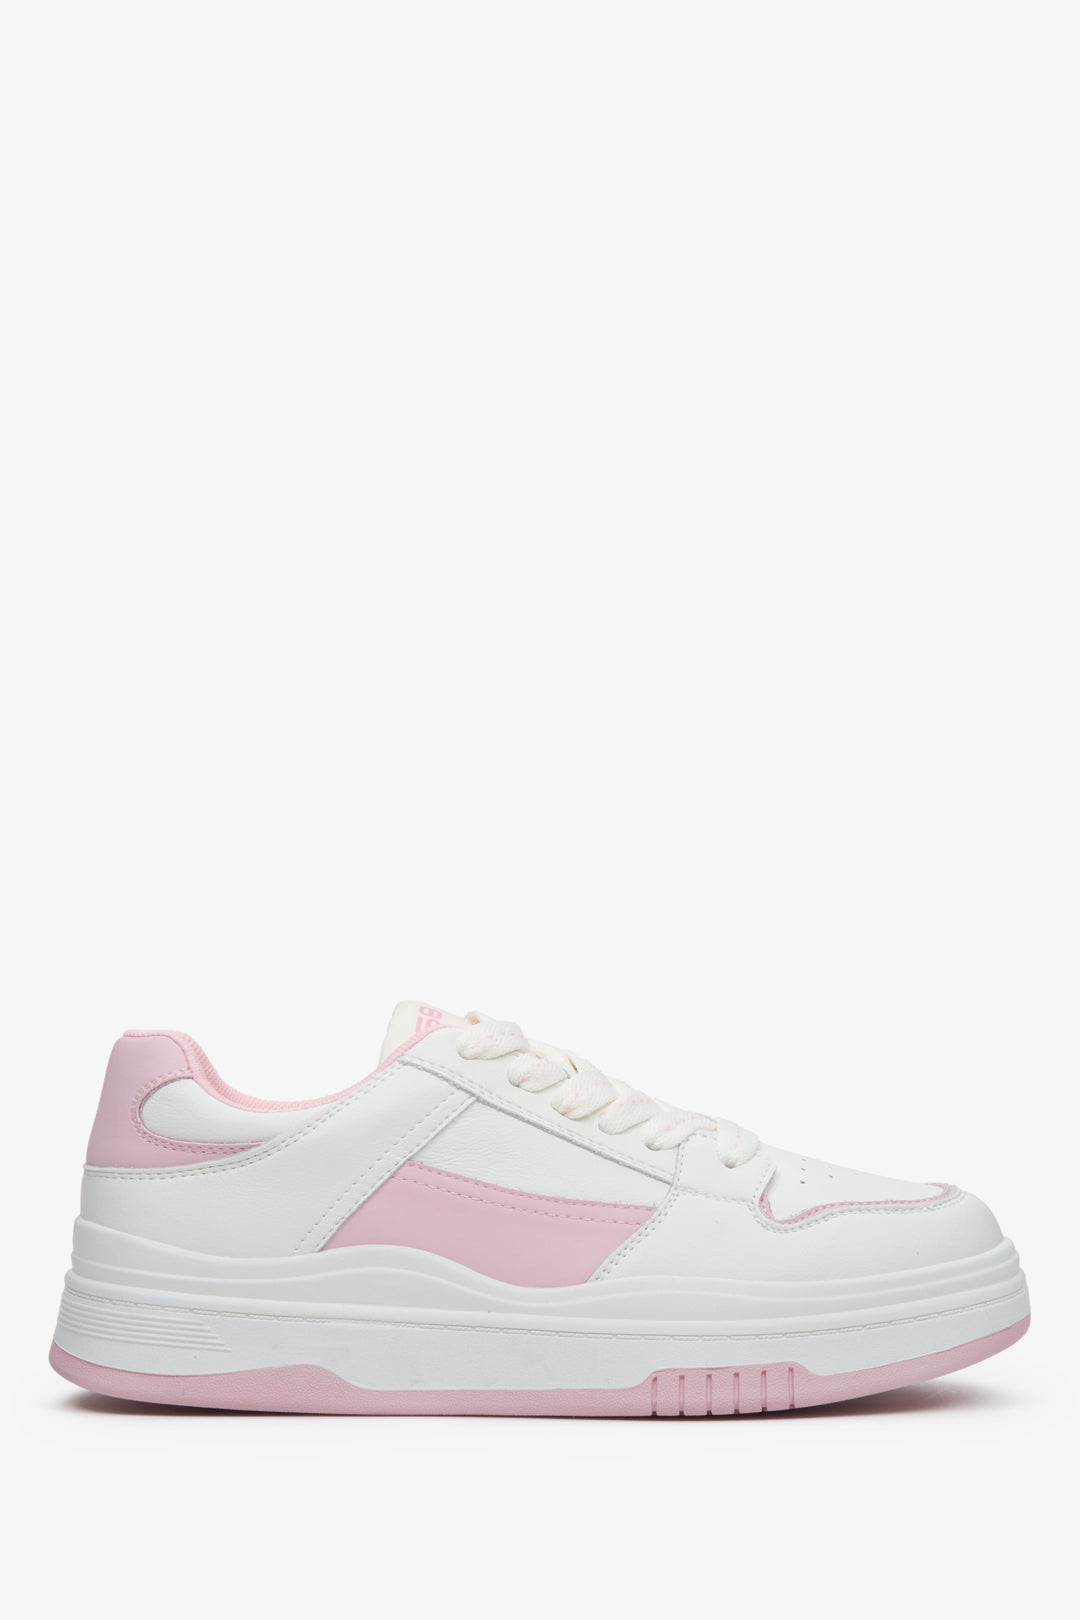 Sophisticated women's white and pink leather sneakers.